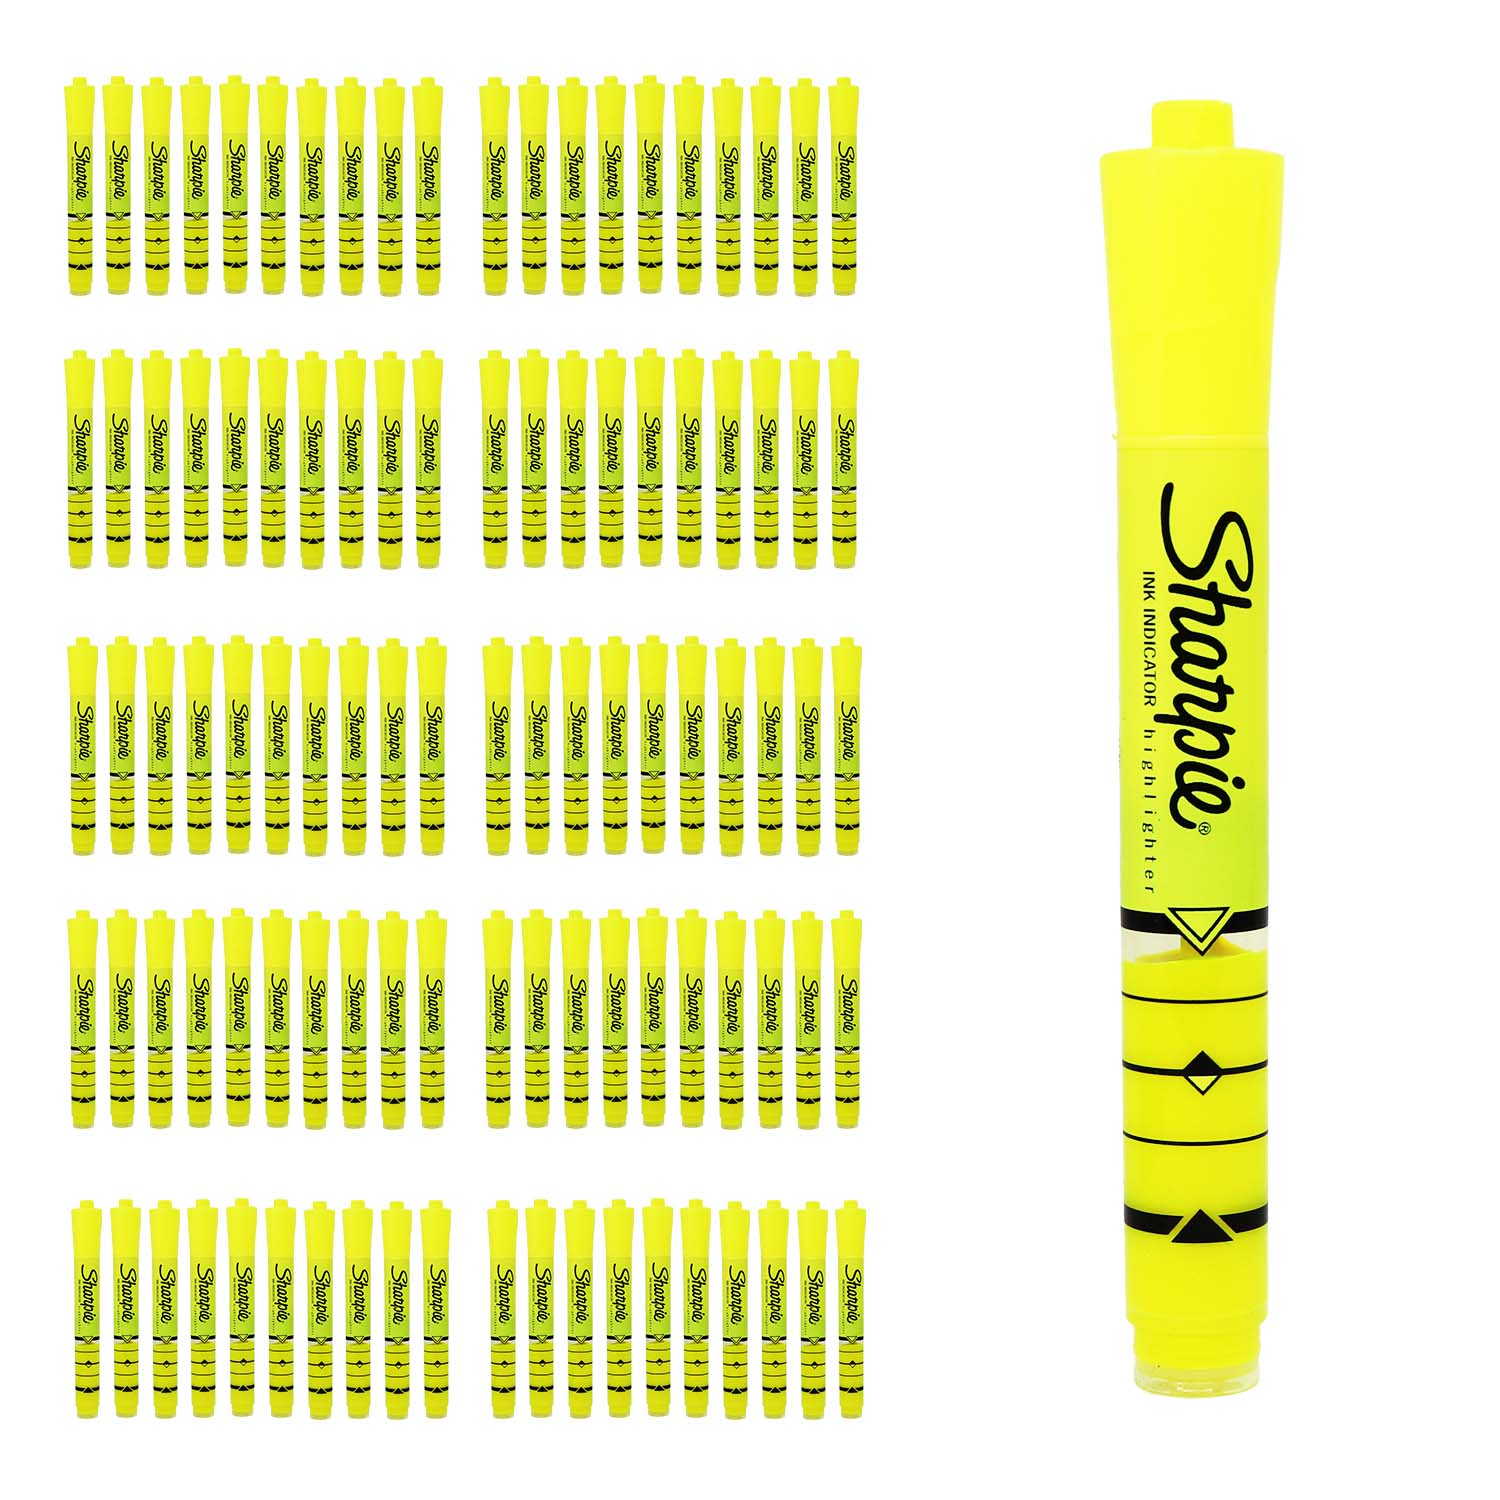 100 Ink Indicator Highlighters in Yellow - Bulk School Supplies Wholesale Case of 100 -Ink Indicator Highlighters